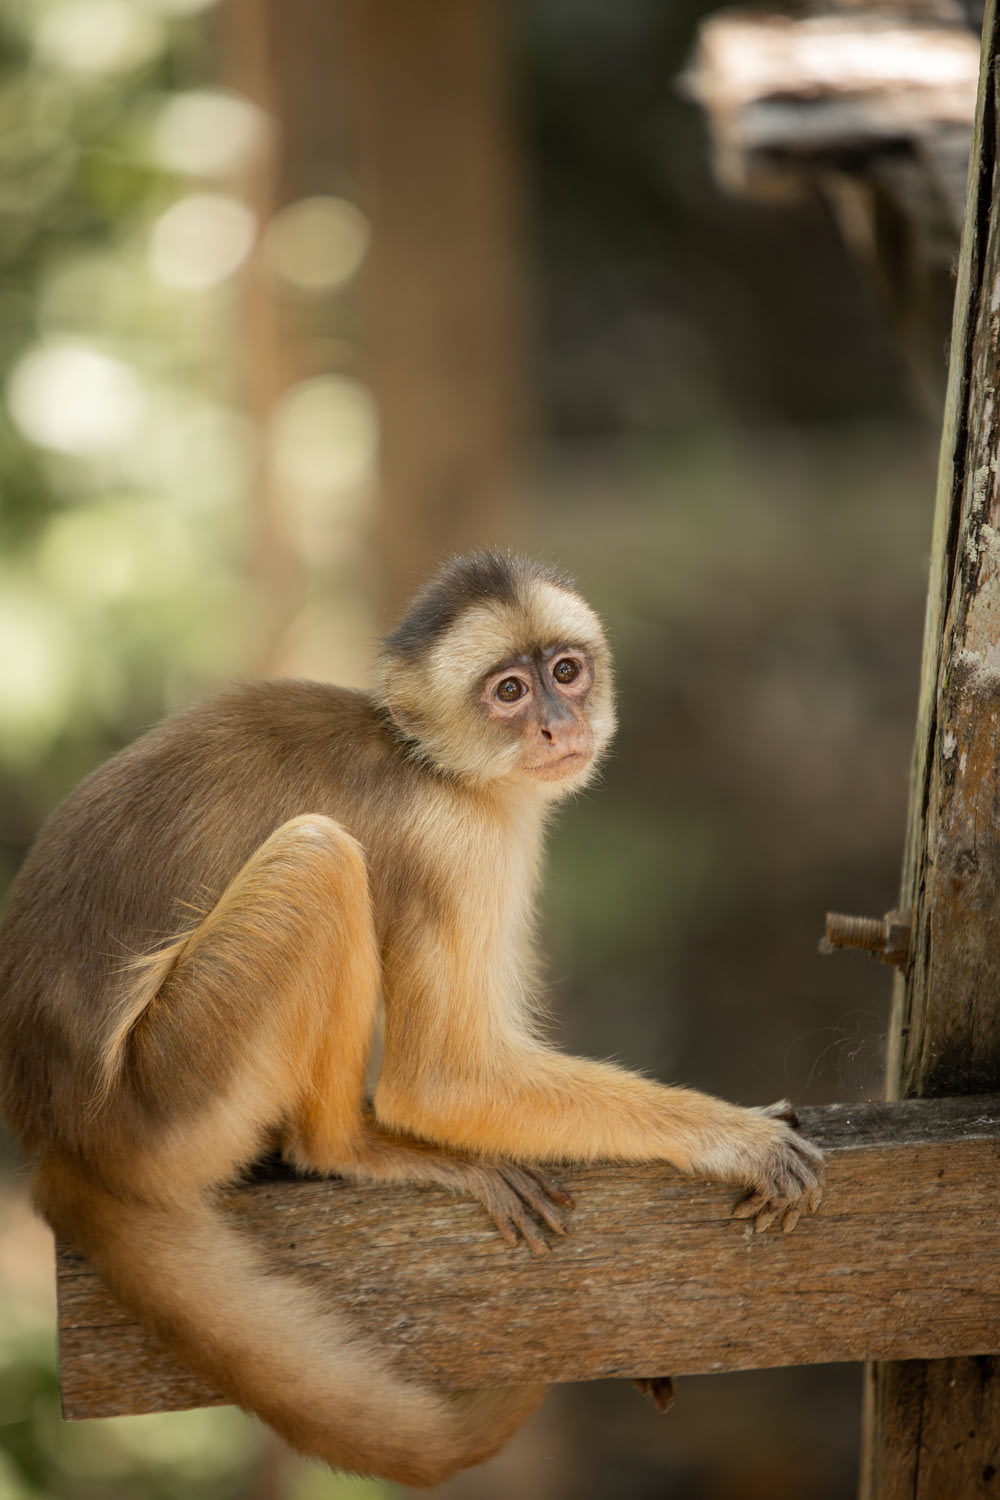 a small monkey sitting on top of a wooden beam